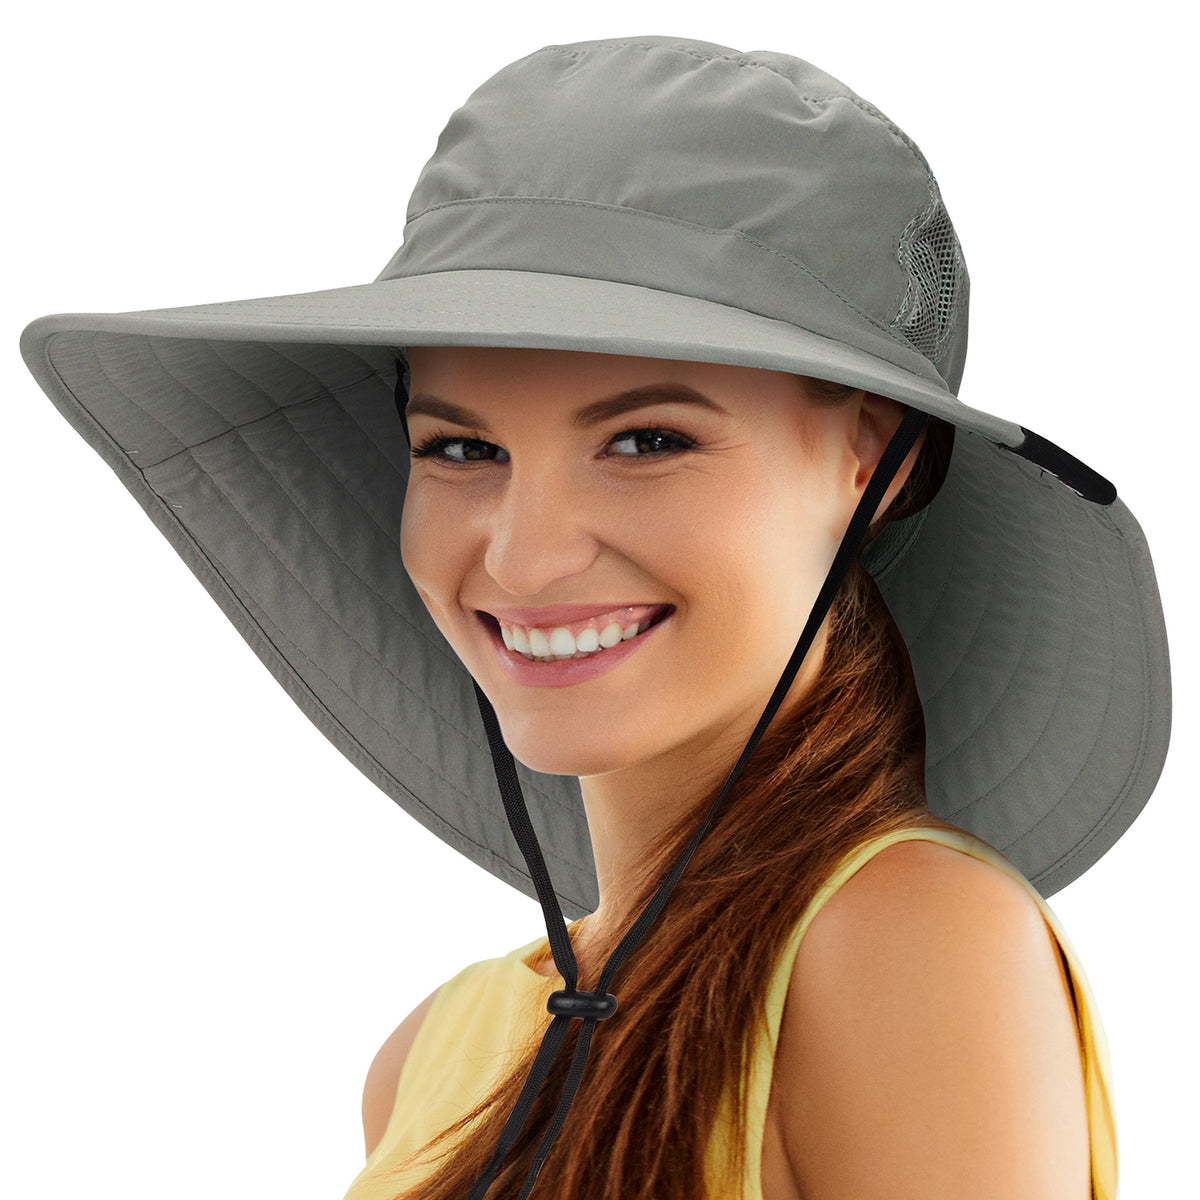 Tirrinia 2 In 1 Outdoors UPF 50+ UV Protection Sun Hat for Womens, One Size  Female Sports Baseball Cap Gardening Fishing Hat with Neck Flap, Khaki 